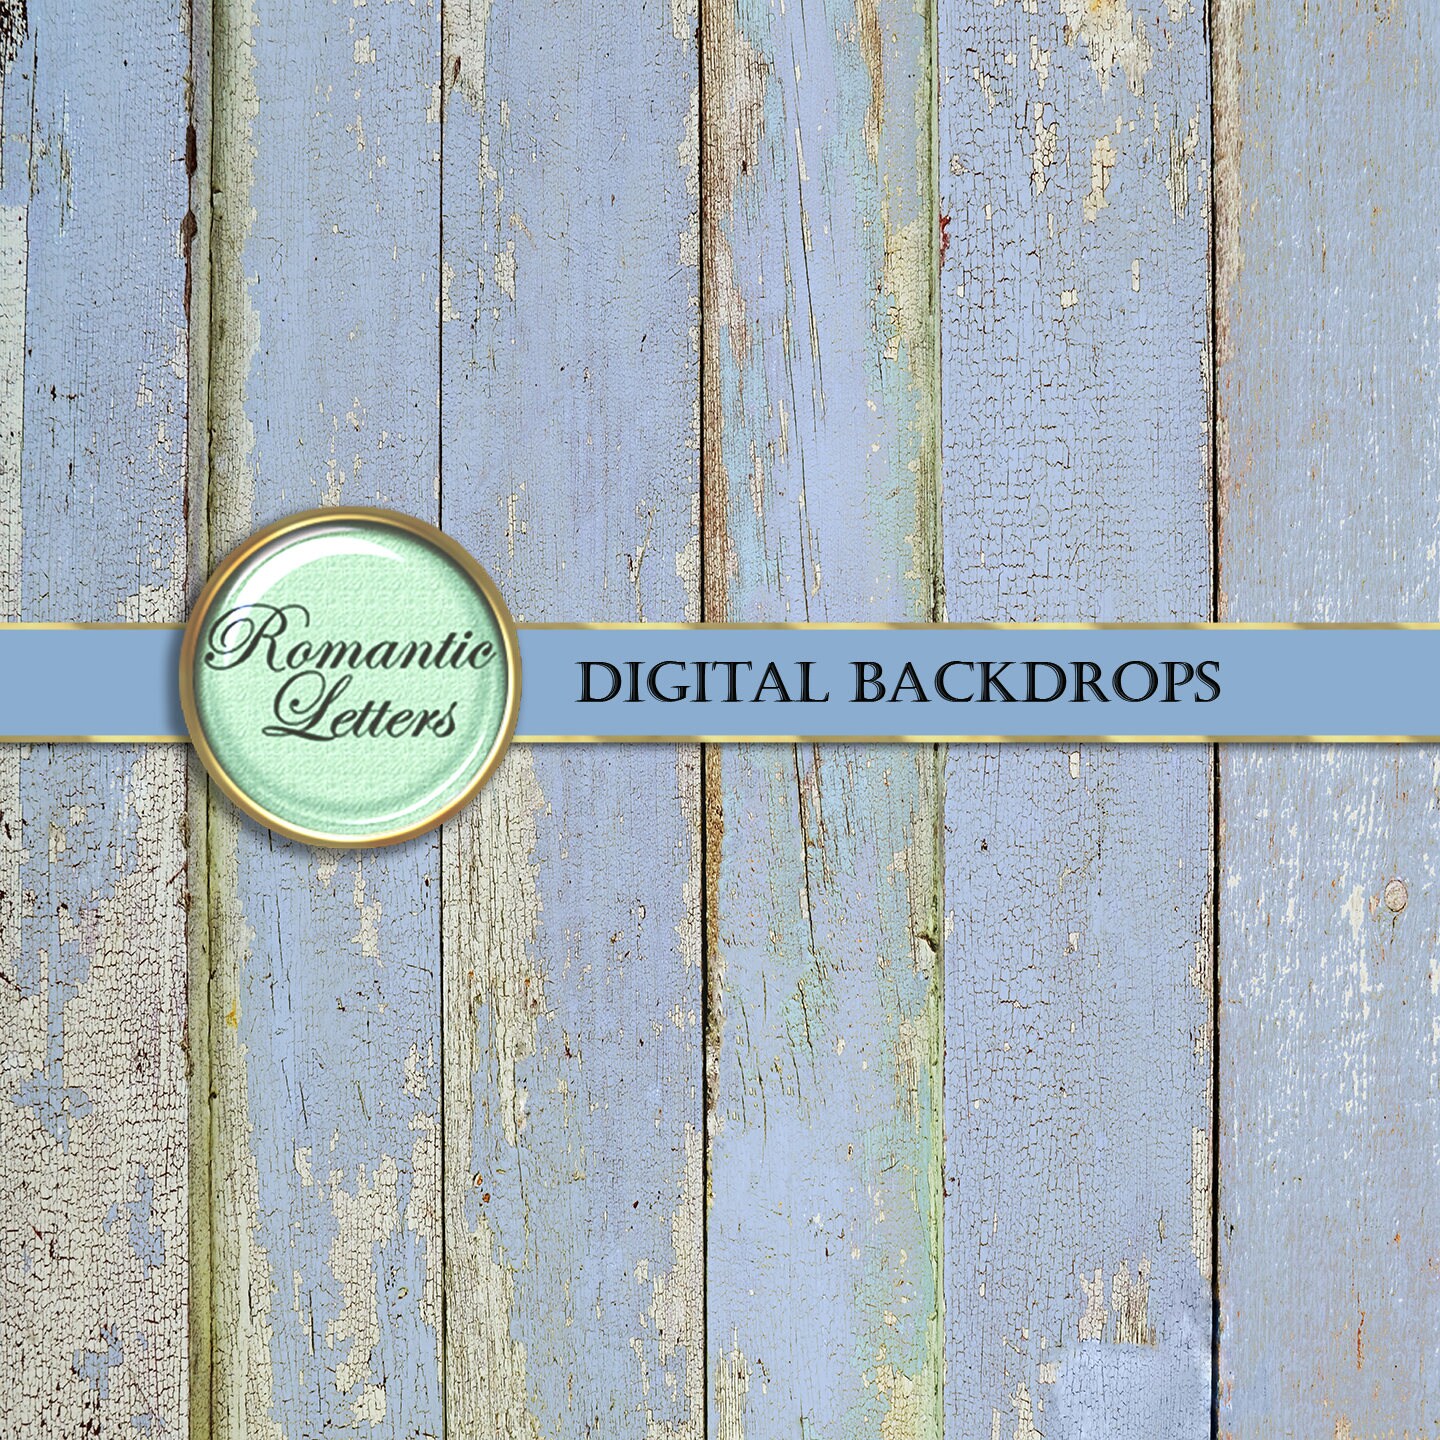 Wood Digital Paper, Blue Wood Texture Background, Old, Distressed